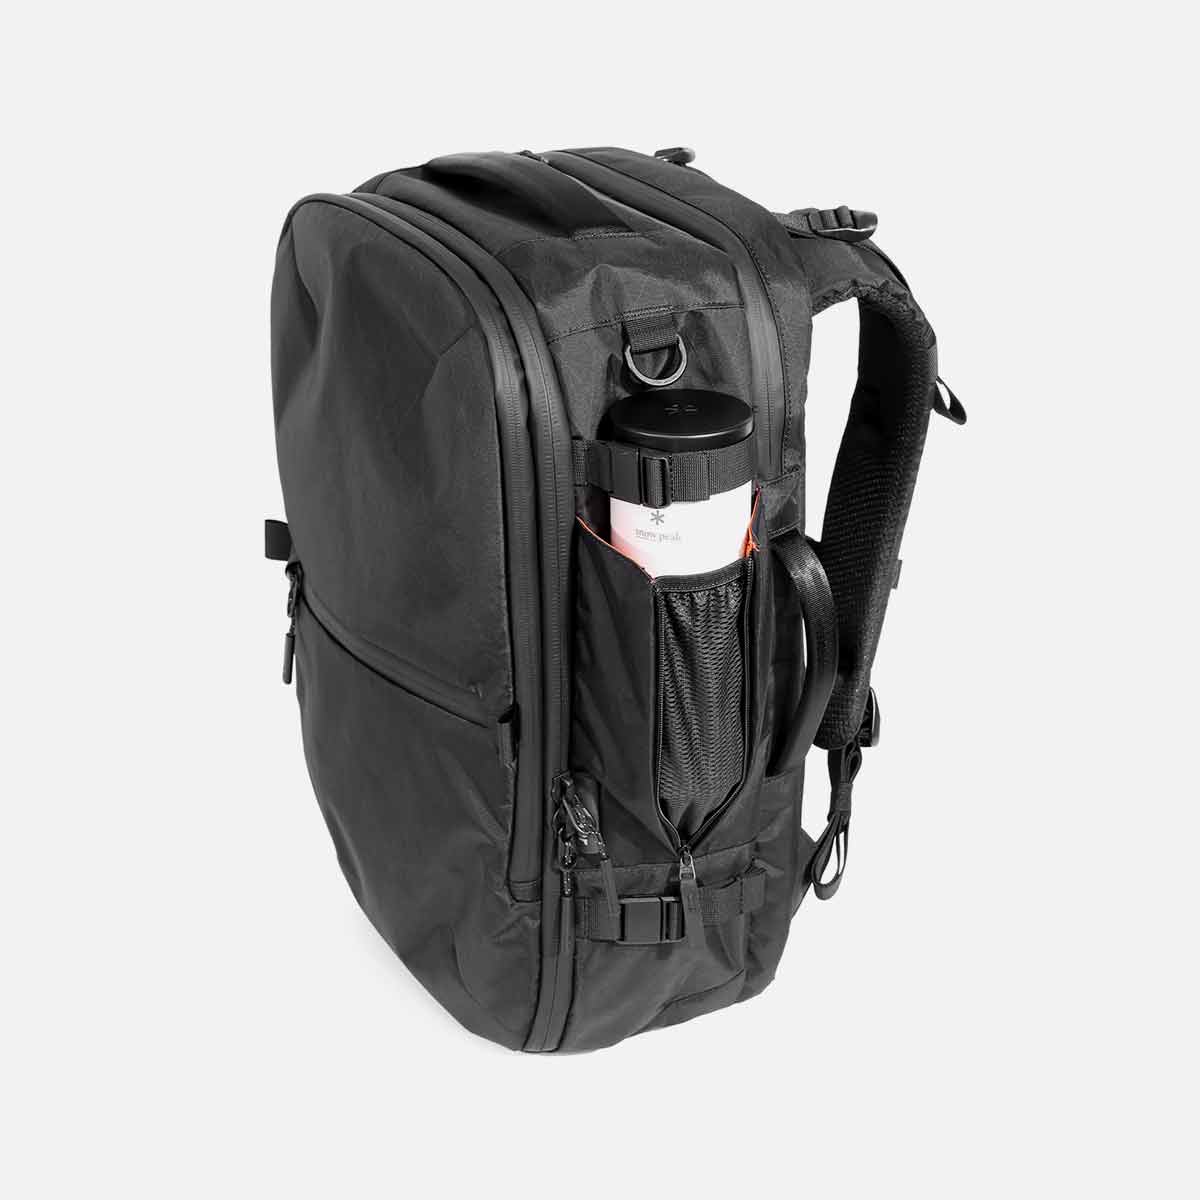 Travel Pack 3 X-Pac | Aer ｜ エアー公式通販サイト